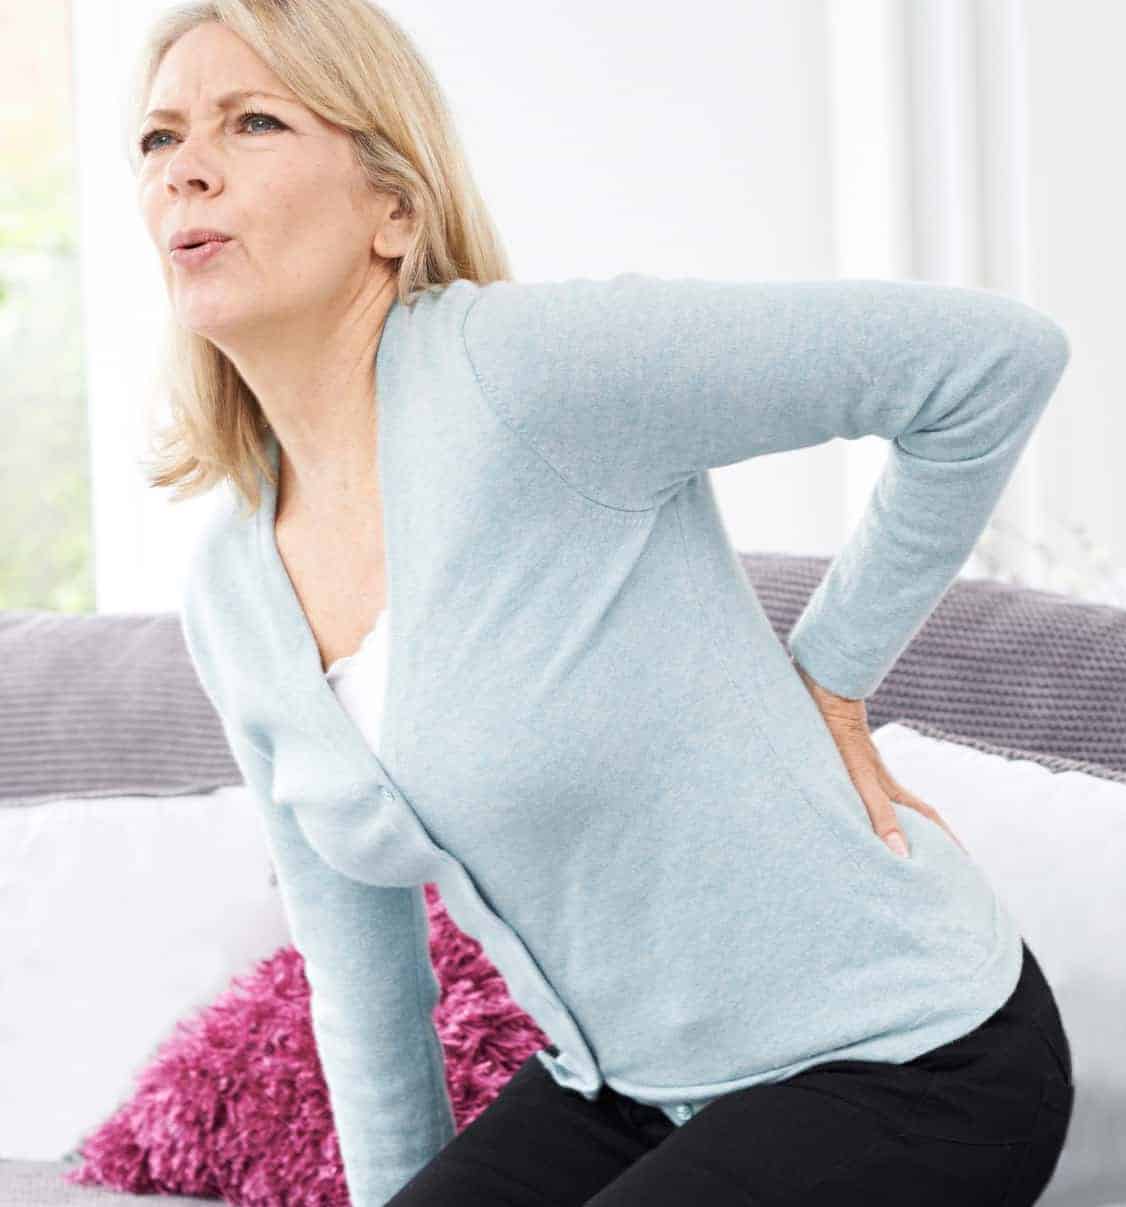 Simple Exercises For Sciatica Pain - woman chair back pain